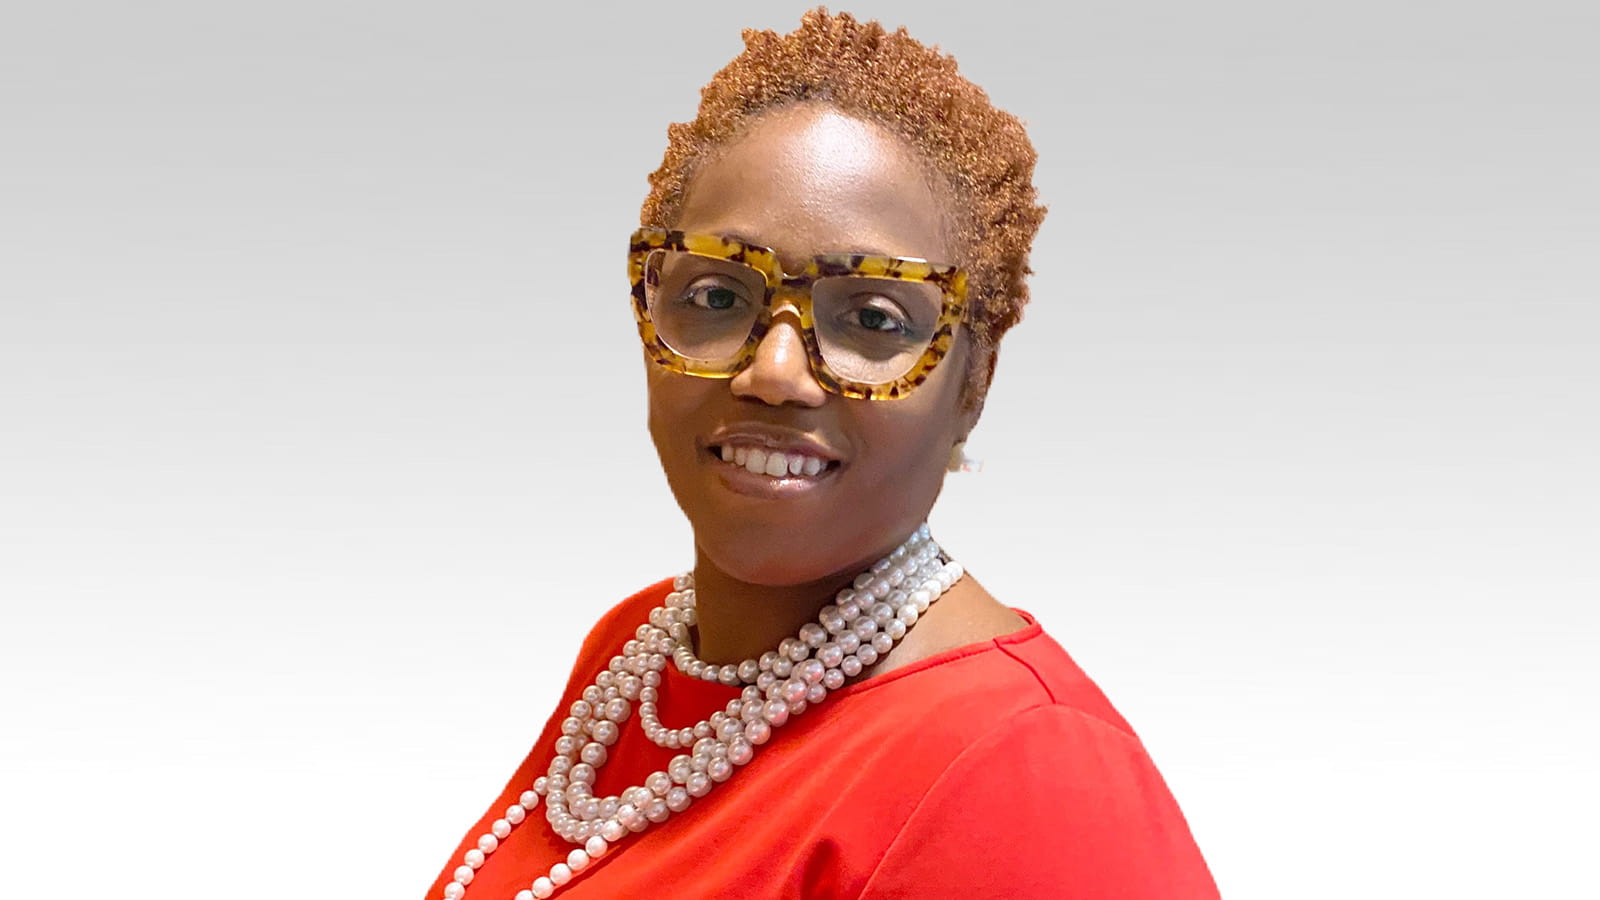 A woman wearing a reddish-orange top, strands of pearls and tortoise shell eyeglasses poses for a professional photograph